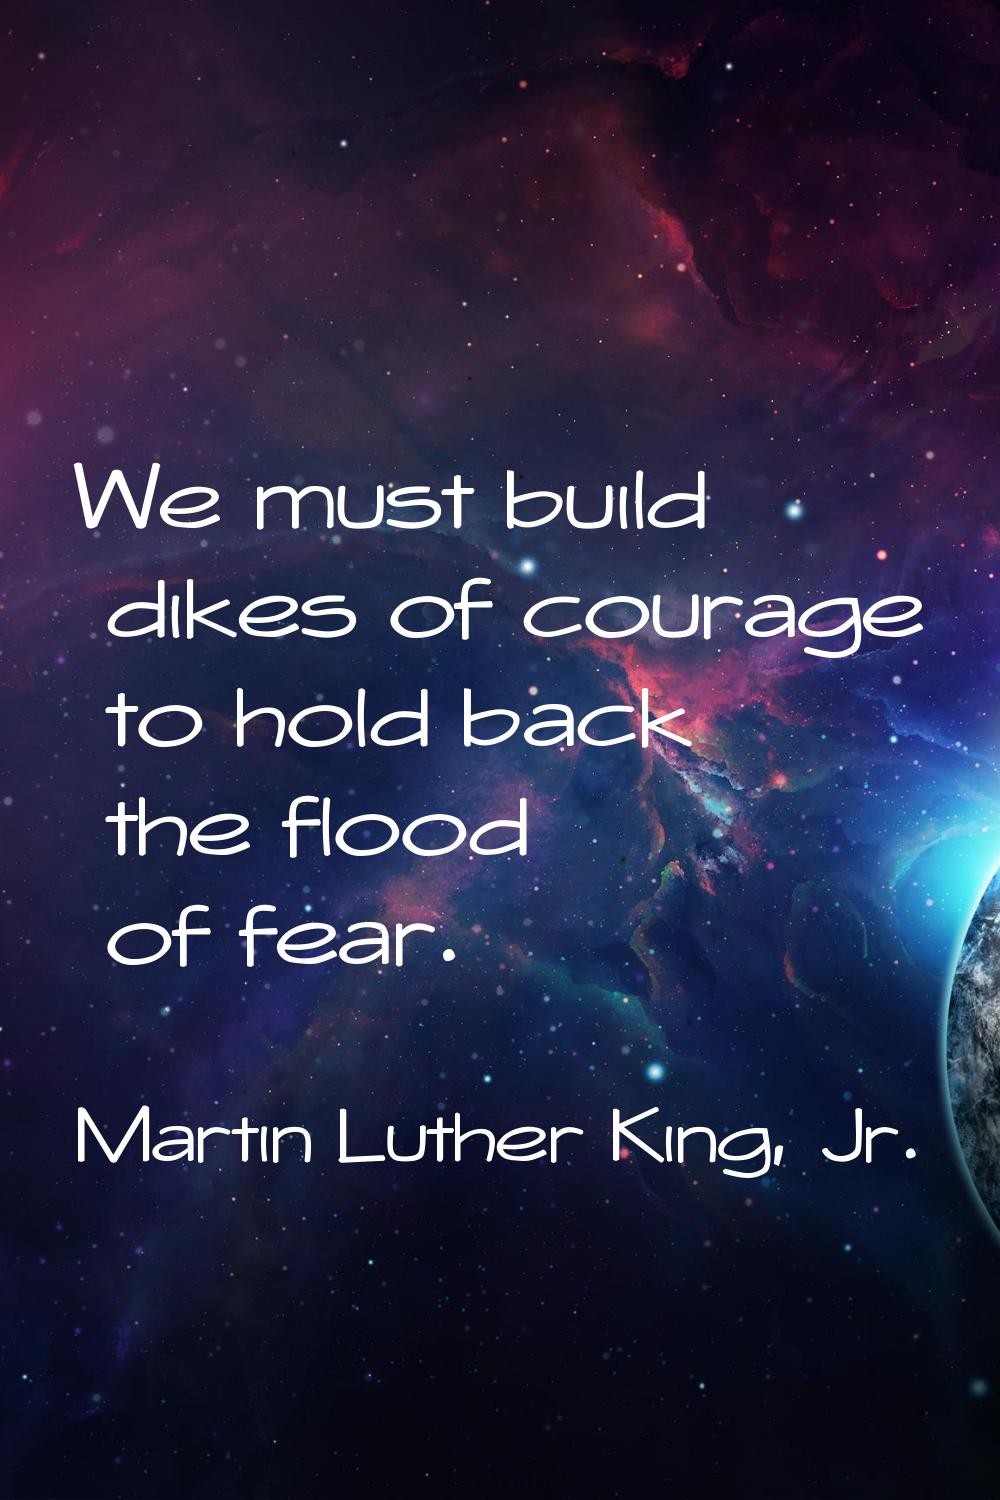 We must build dikes of courage to hold back the flood of fear.